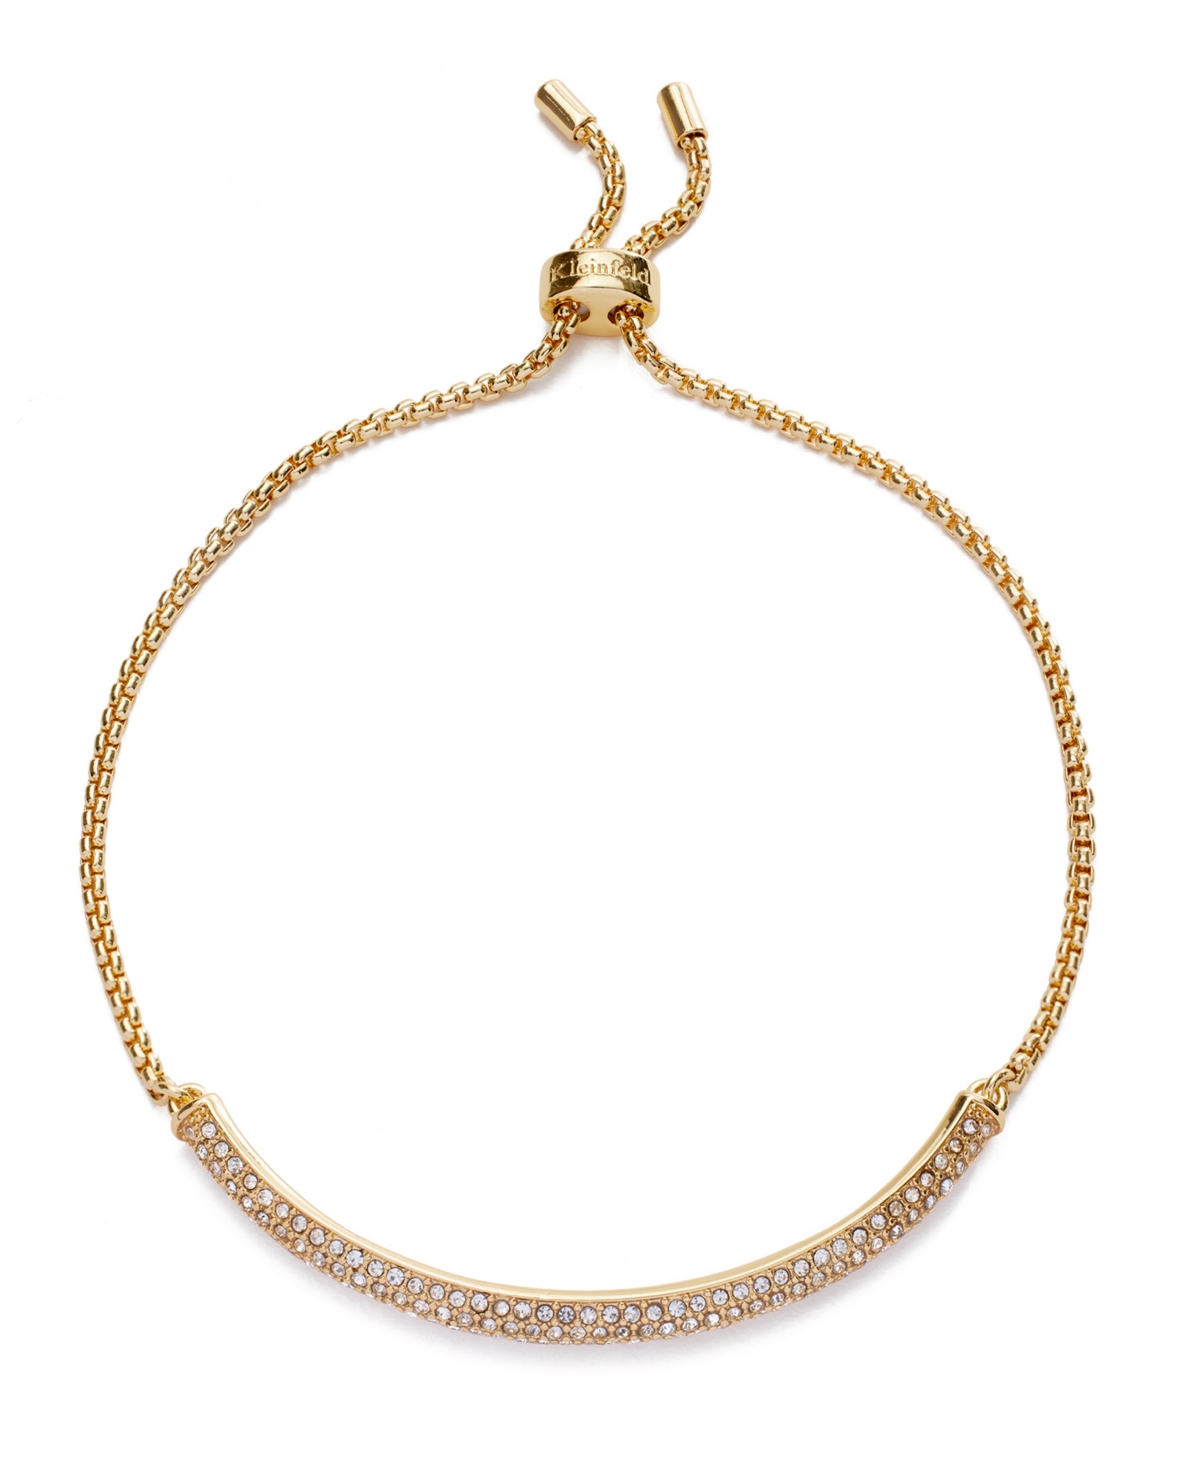 Kleinfeld Faux Stone Pave Bar Delicate Bracelet In Crystal,gold